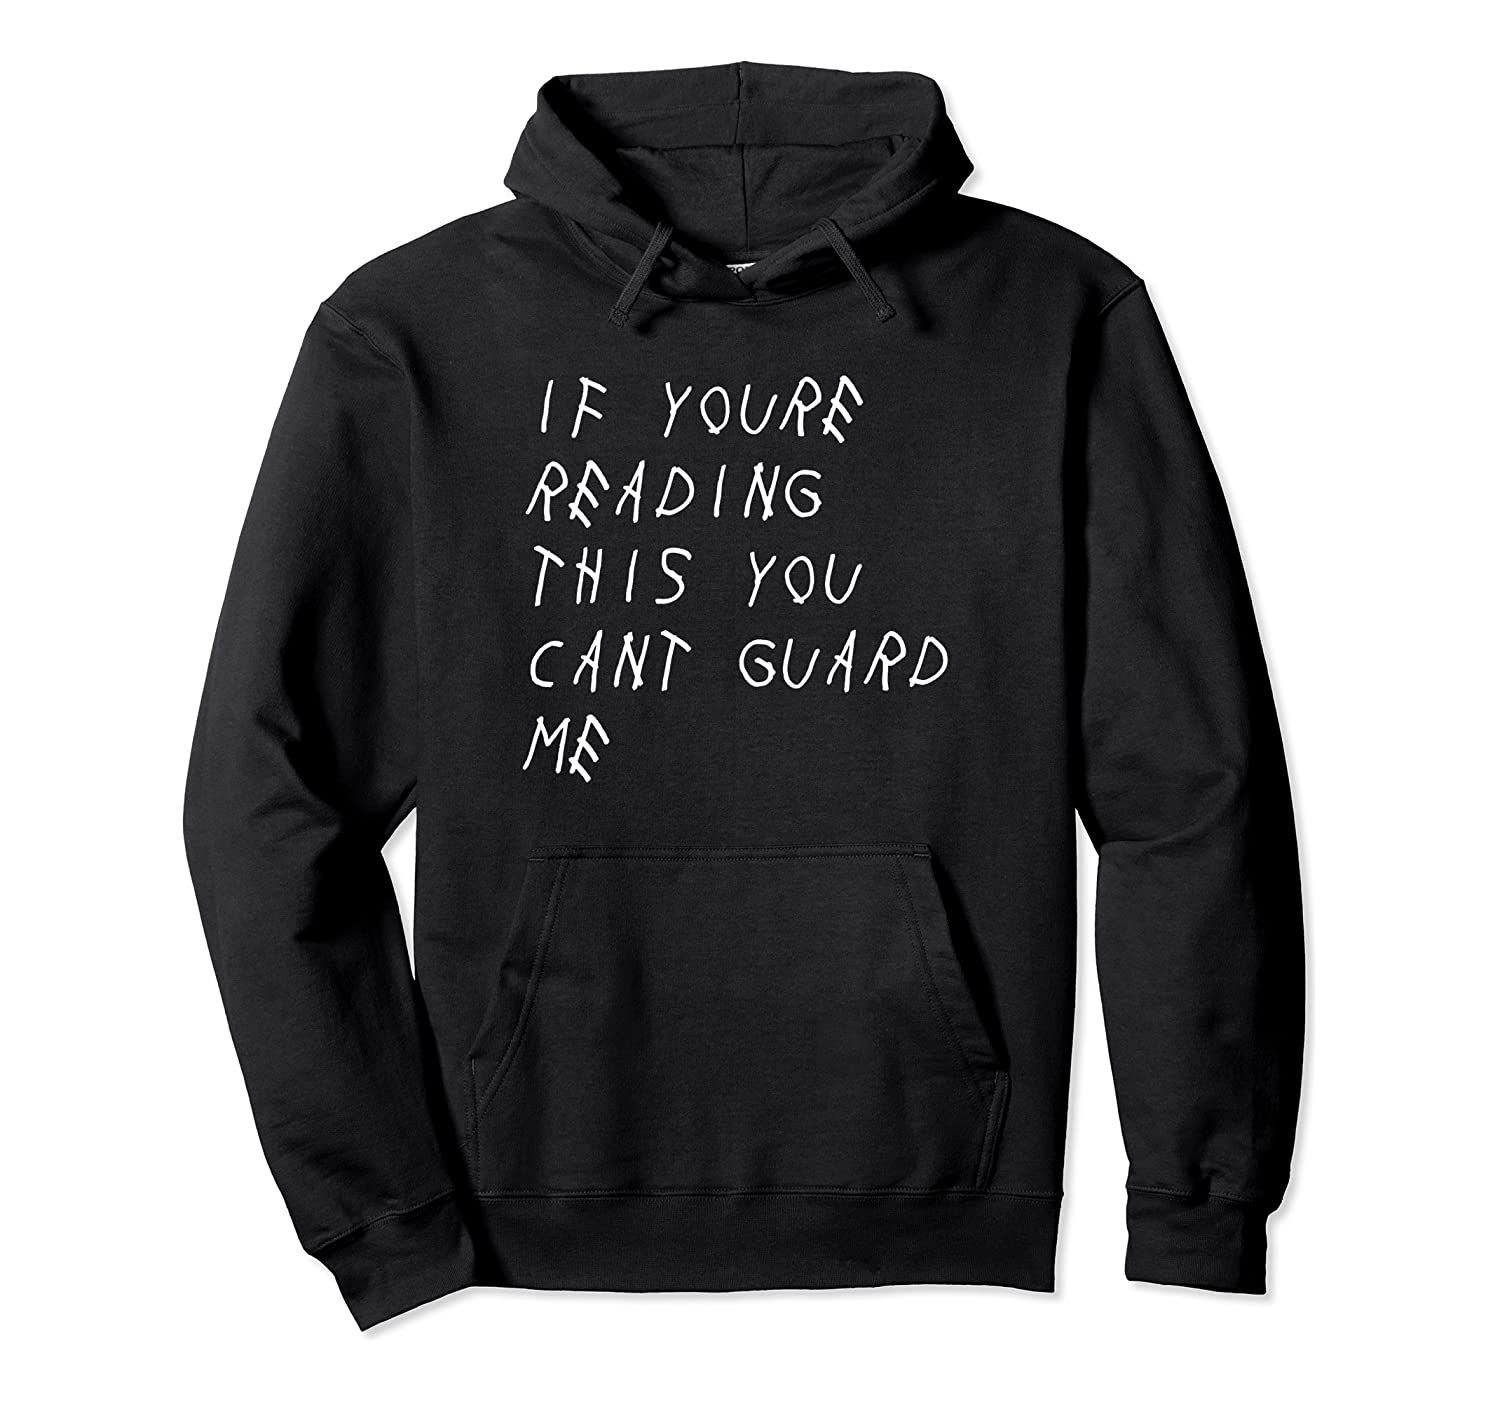 If You’re Reading This You Cant Guard Me Basketball Hoodie Pullover Hoodie, T-Shirt, Sweatshirt